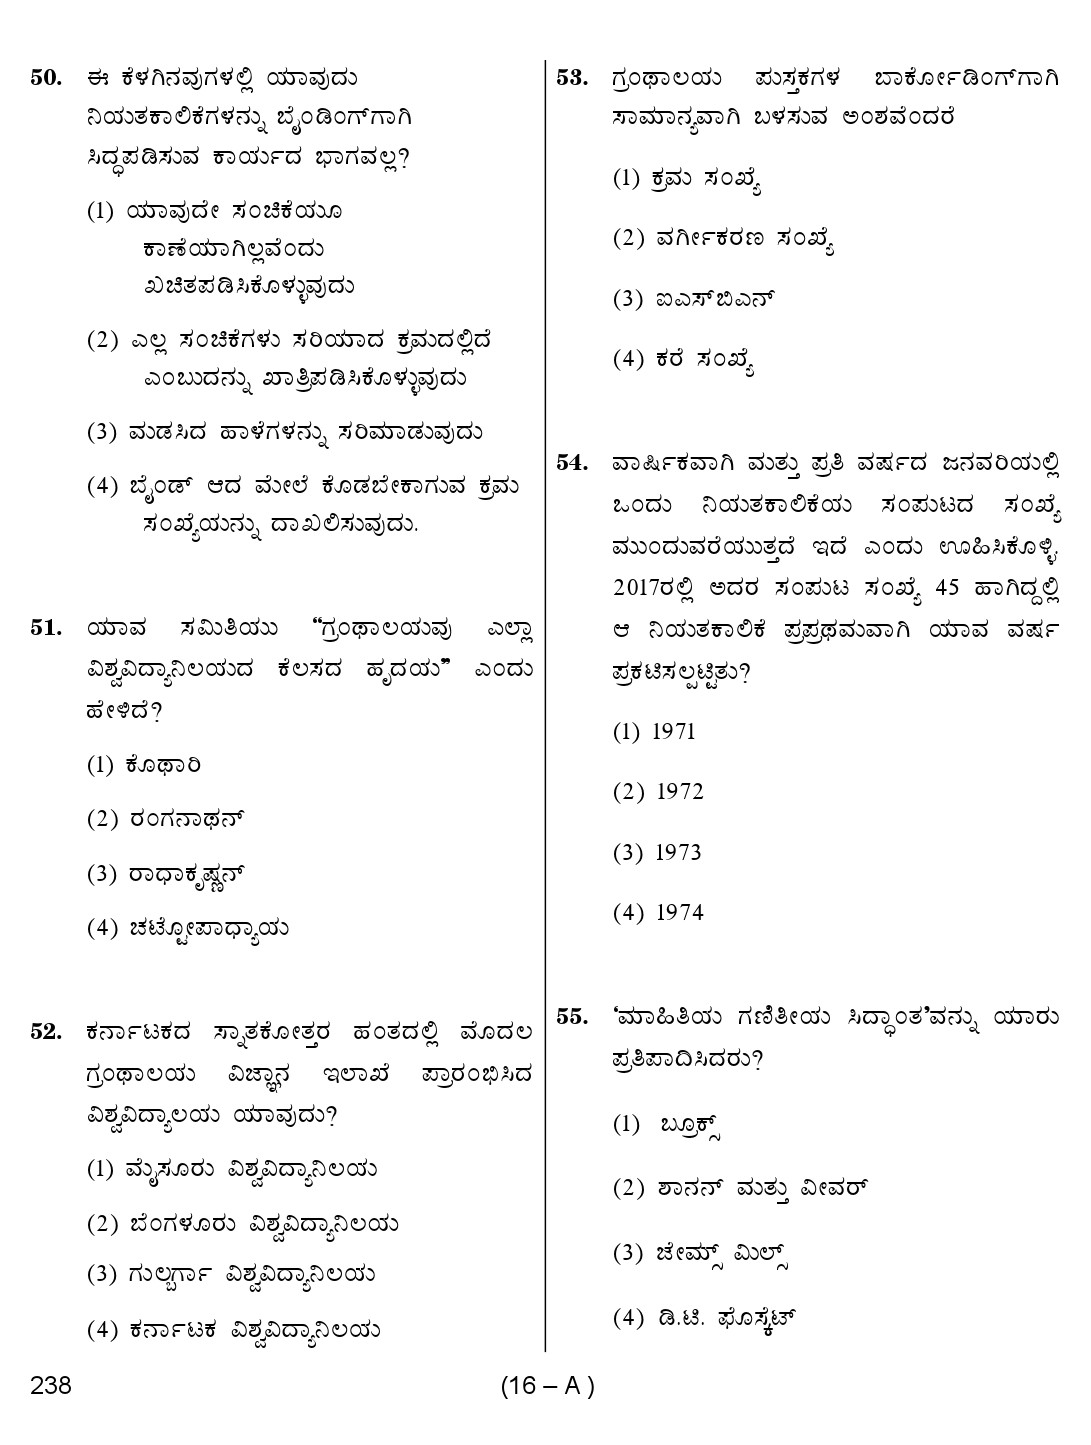 Karnataka PSC 238 Specific Paper II Librarian Exam Sample Question Paper 16